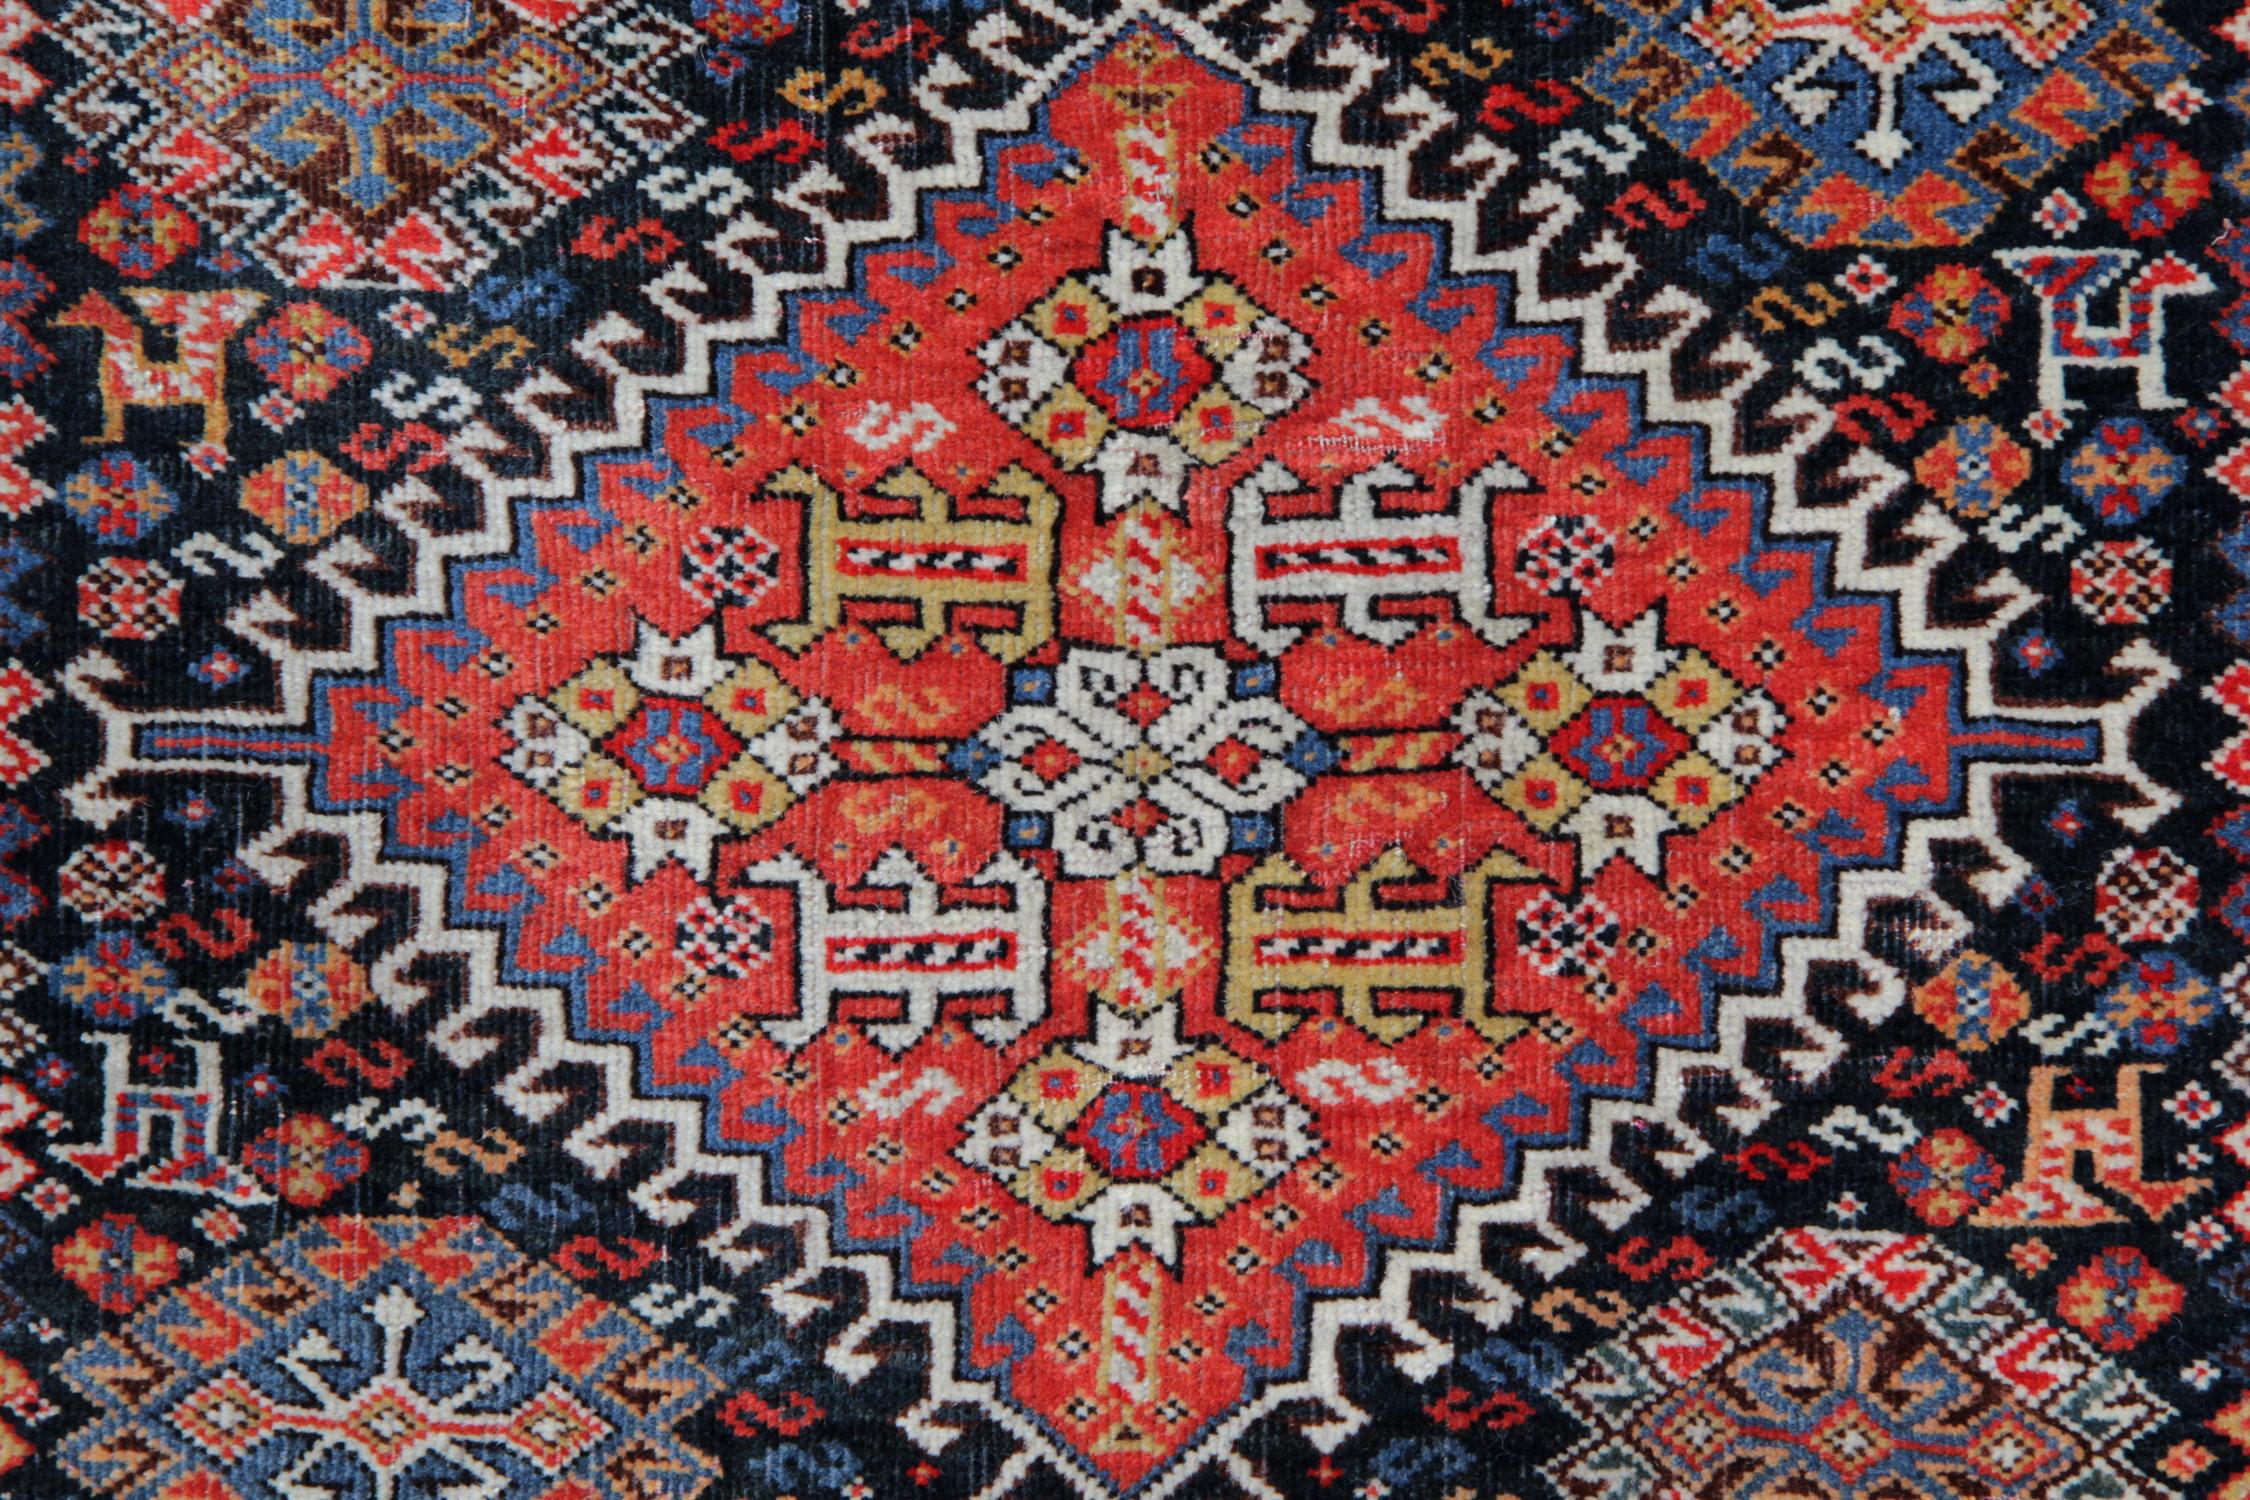 This beautiful oriental rug features a red field with a unique central medallion, the diamond is then surrounded by smaller motifs and animal figures woven on a contrasting black background in accents of red, ivory and blue. The border is highly